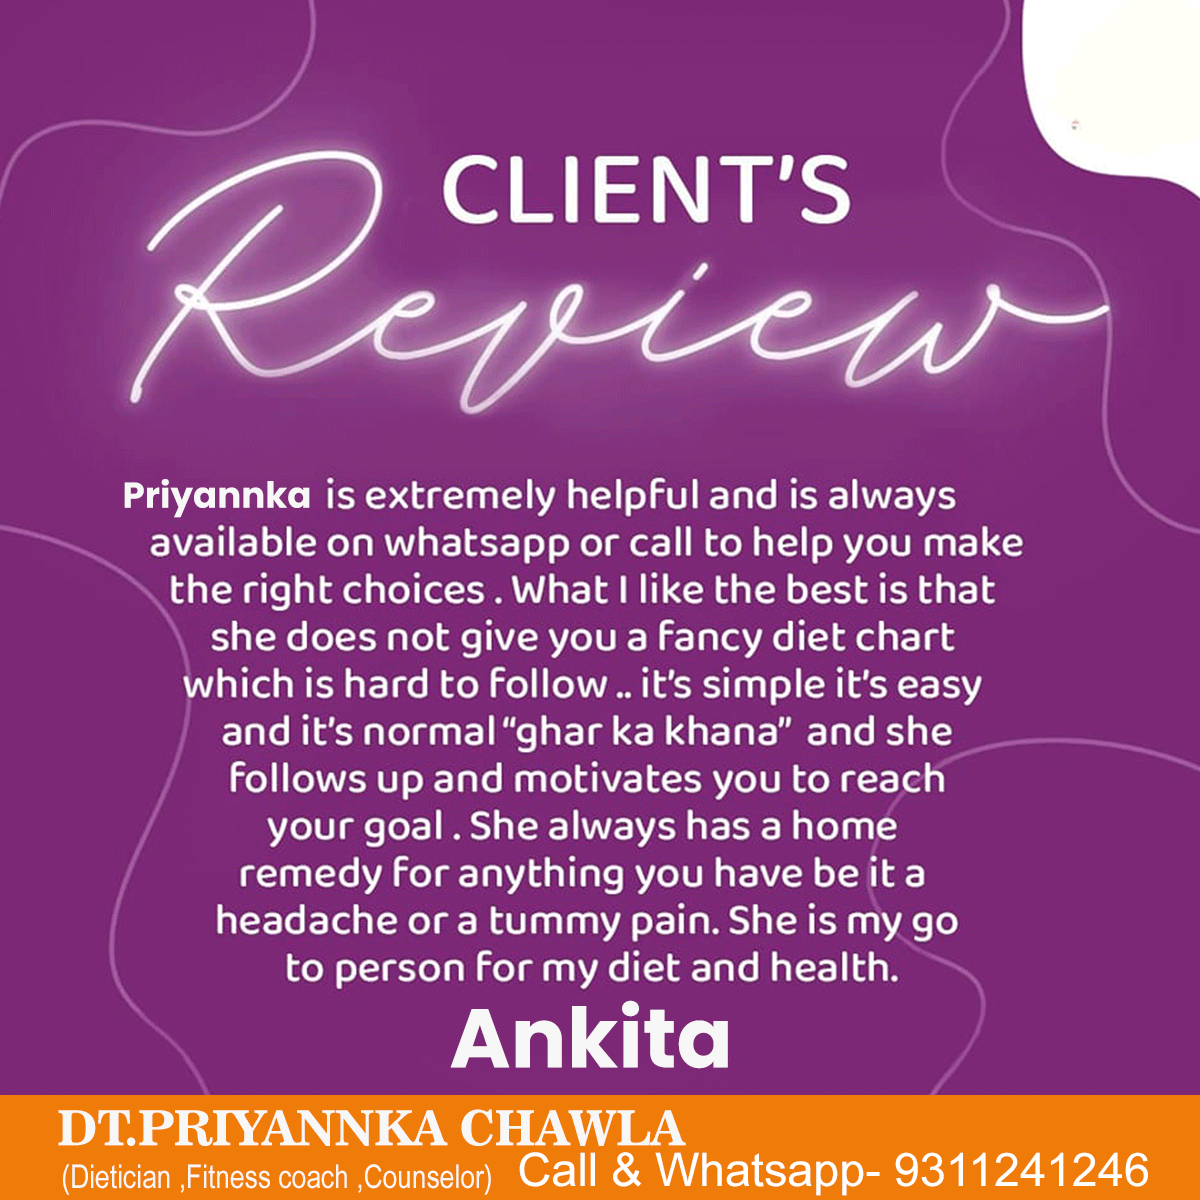 Each and every client review we recieve is a true gift to us! Its this kind of feedback that makes us passionate about what we do. It really makes us feel good
Dt priyannka Chawla ( Dietician,Fitness Coach, Counselor )
Call & Whatsapp- 9311241246
#stayhealthytogether